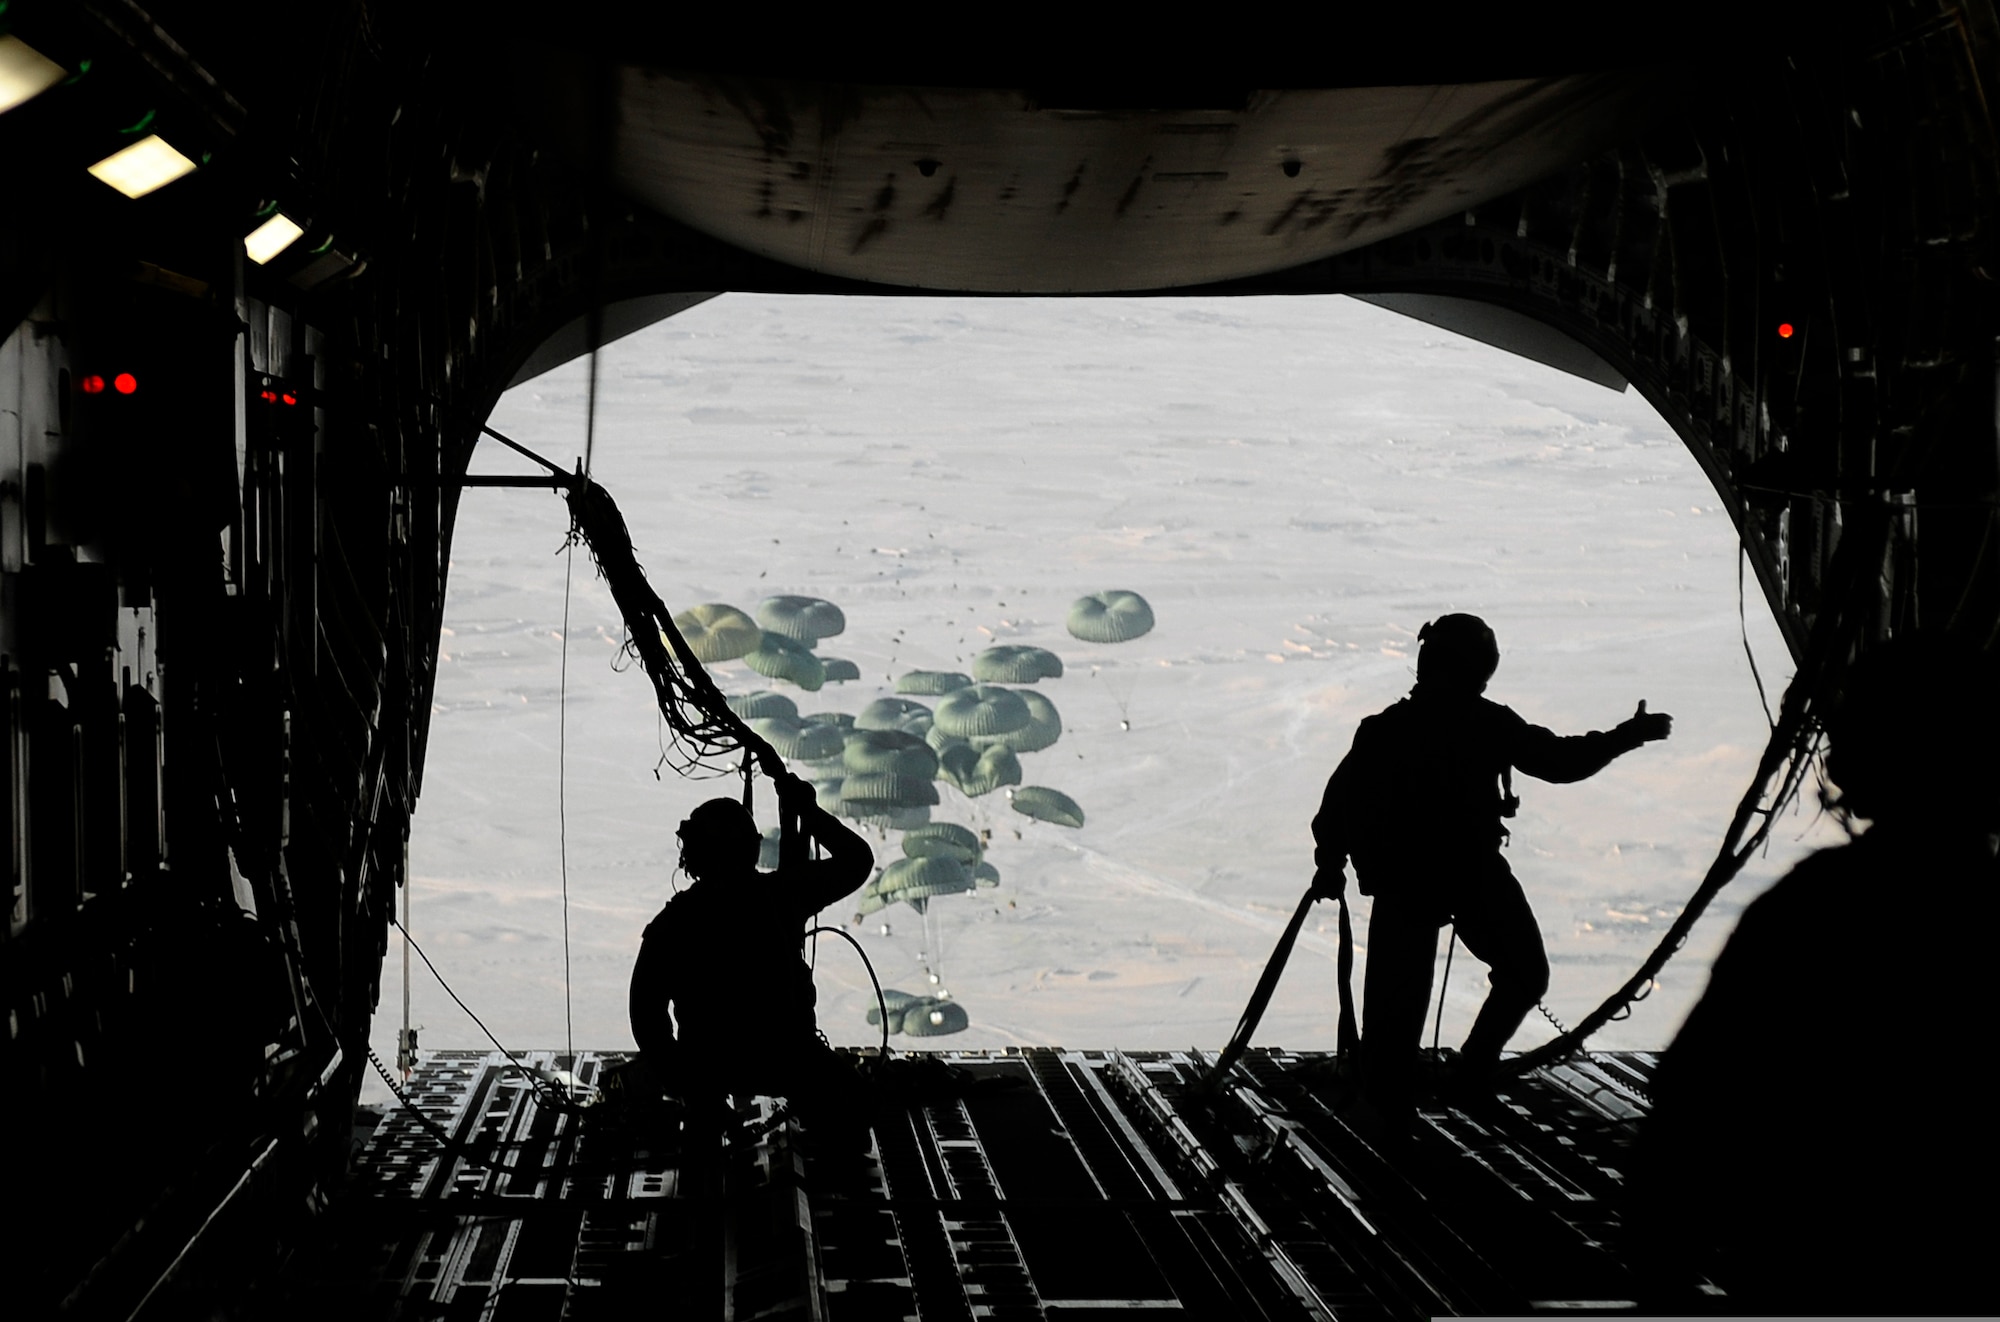 Air Force loadmasters assigned to the 816th Expeditionary Airlift Squadron conduct an airdrop from a C-17 Globemaster III aircraft Sept. 2, 2009, over the southern region of Afghanistan. Pallets are being airdropped to provide needed supplies to ground personnel. (U.S. Air Force photo/Staff Sgt. Shawn Weismiller) 